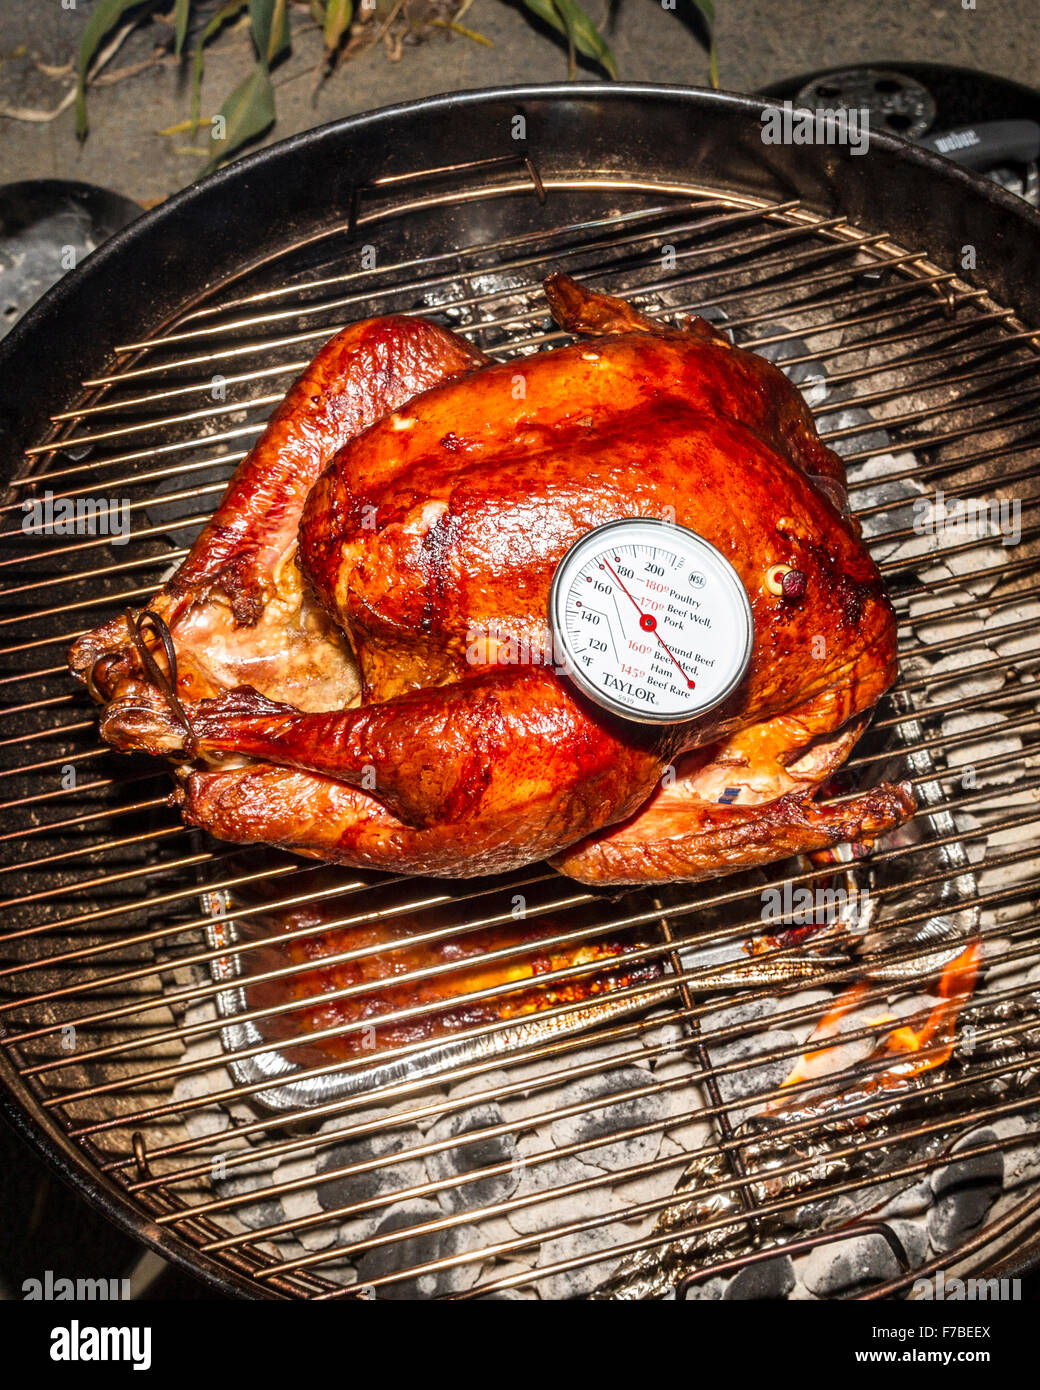 A salt rub brined Thanksgiving Turkey cooked on a Weber Kettle barbecue with meat thermometer indicating doneness Stock Photo